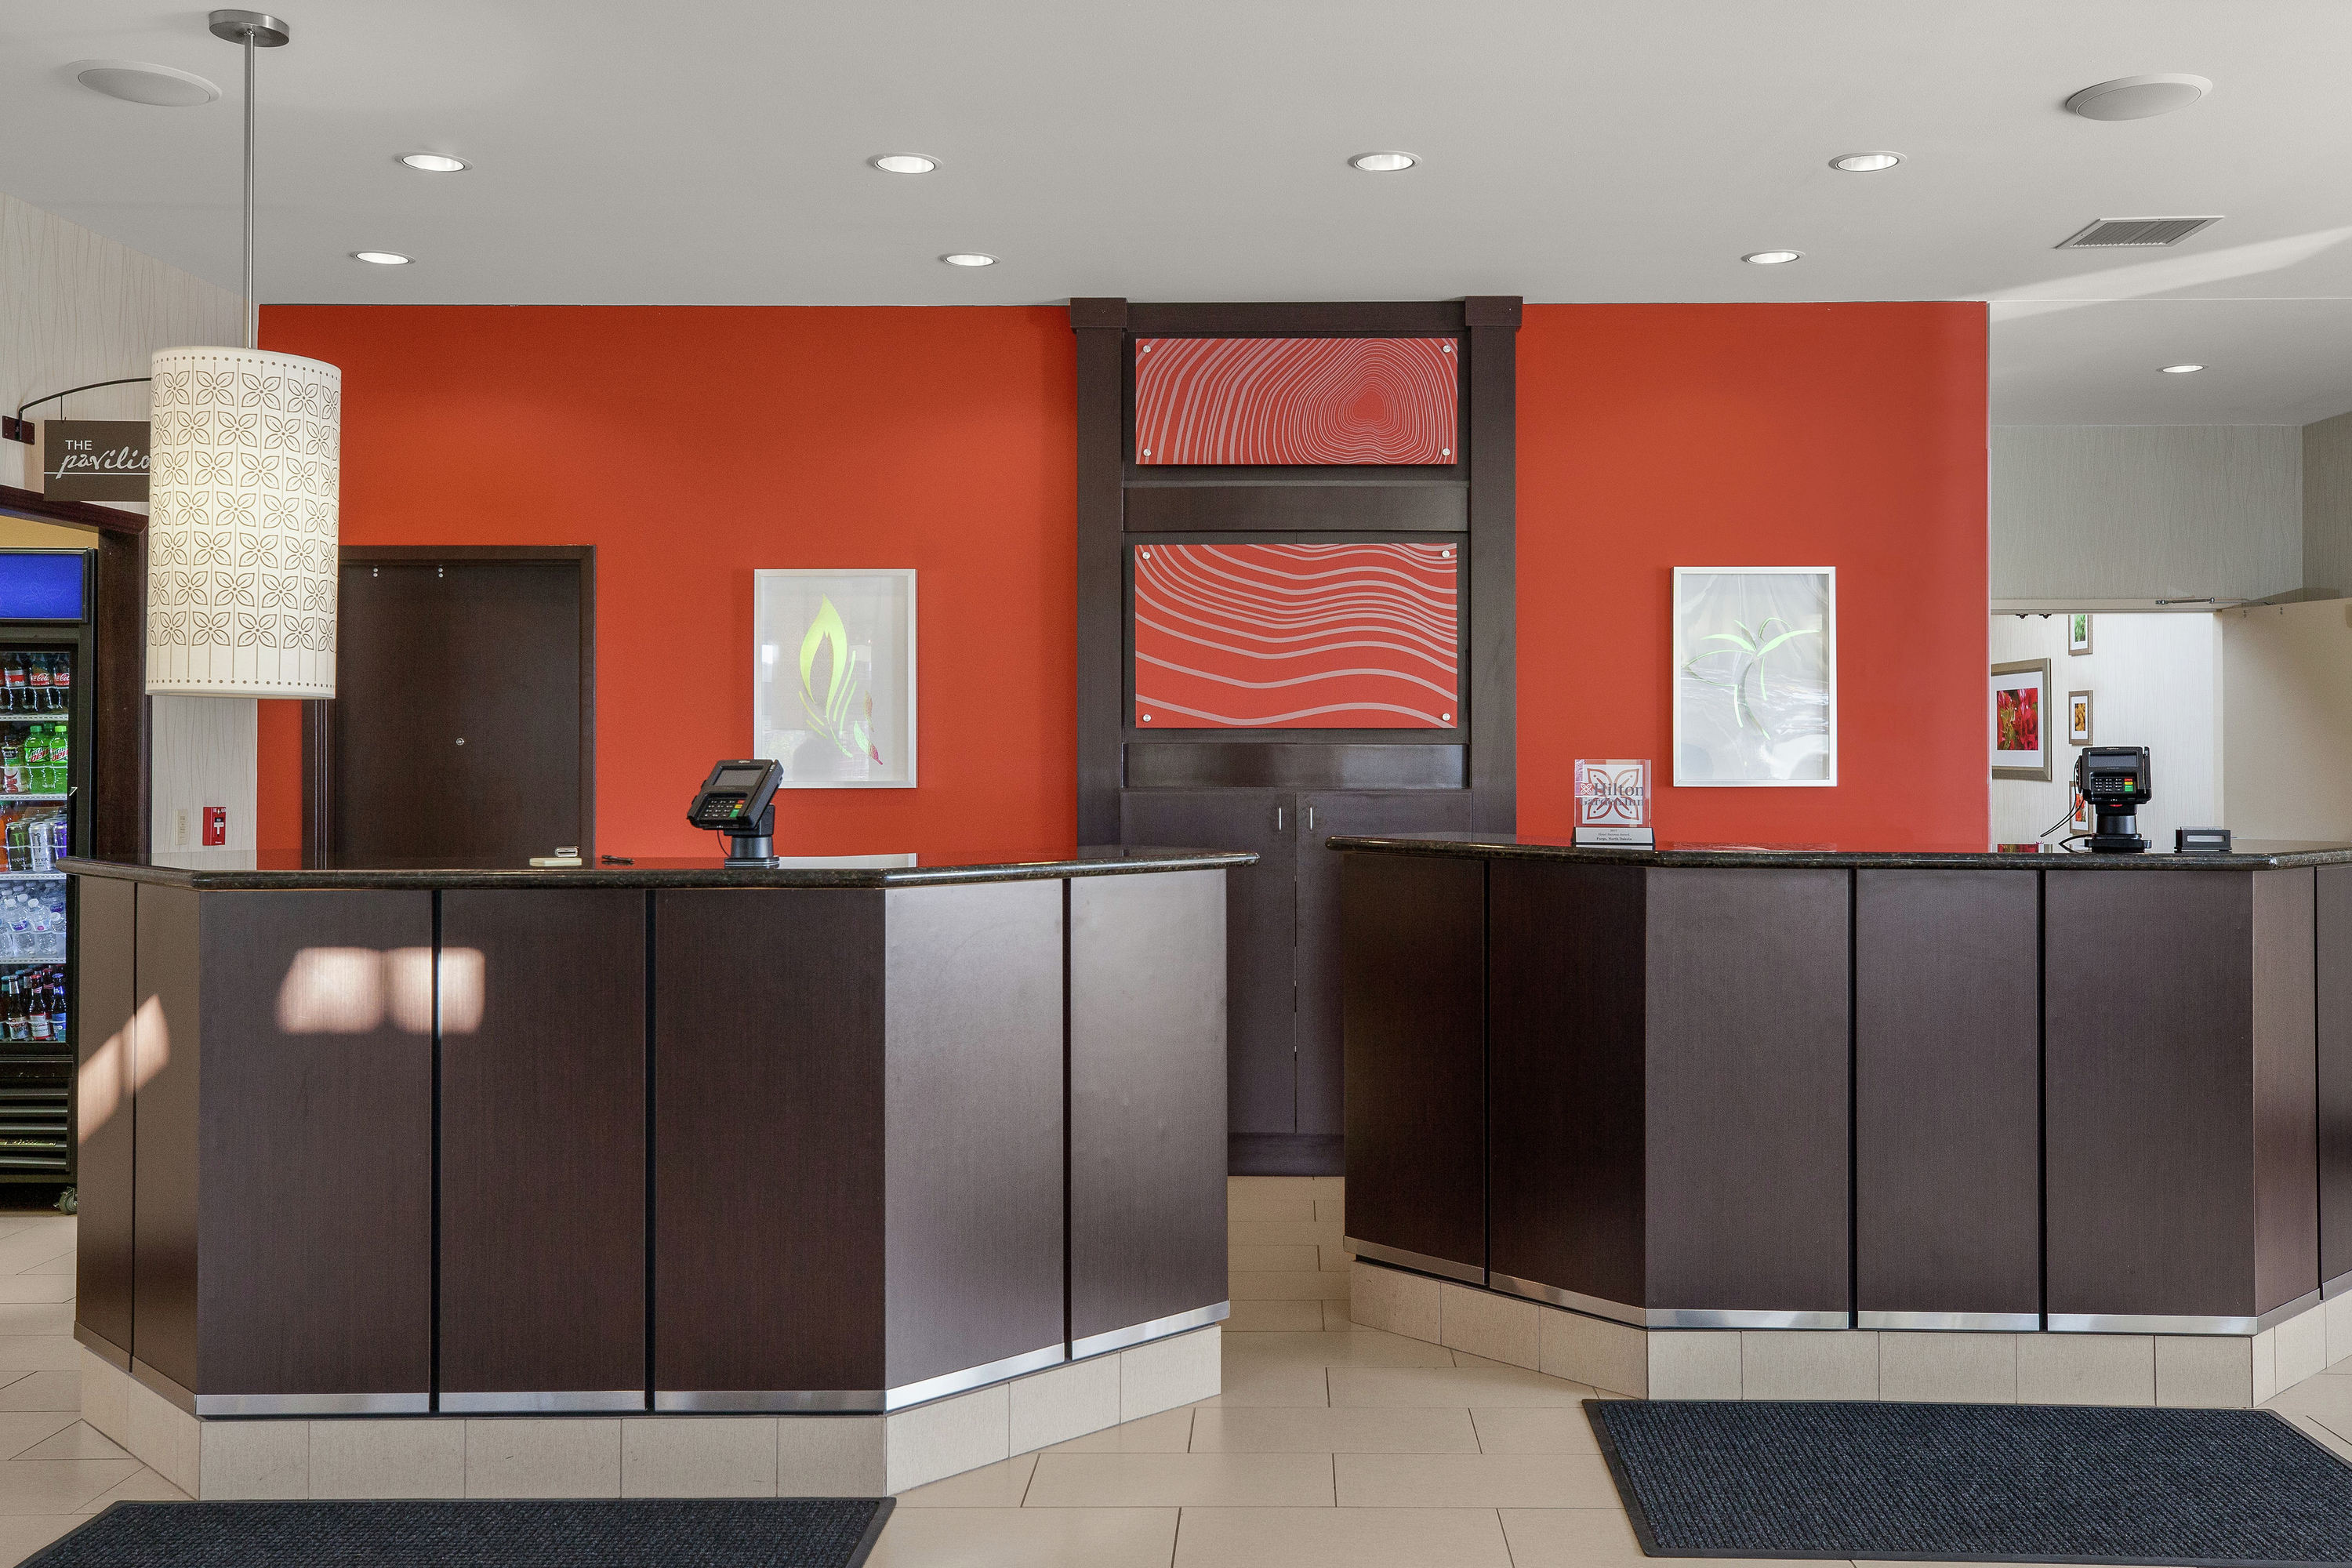 Front Desk with Orange Wall